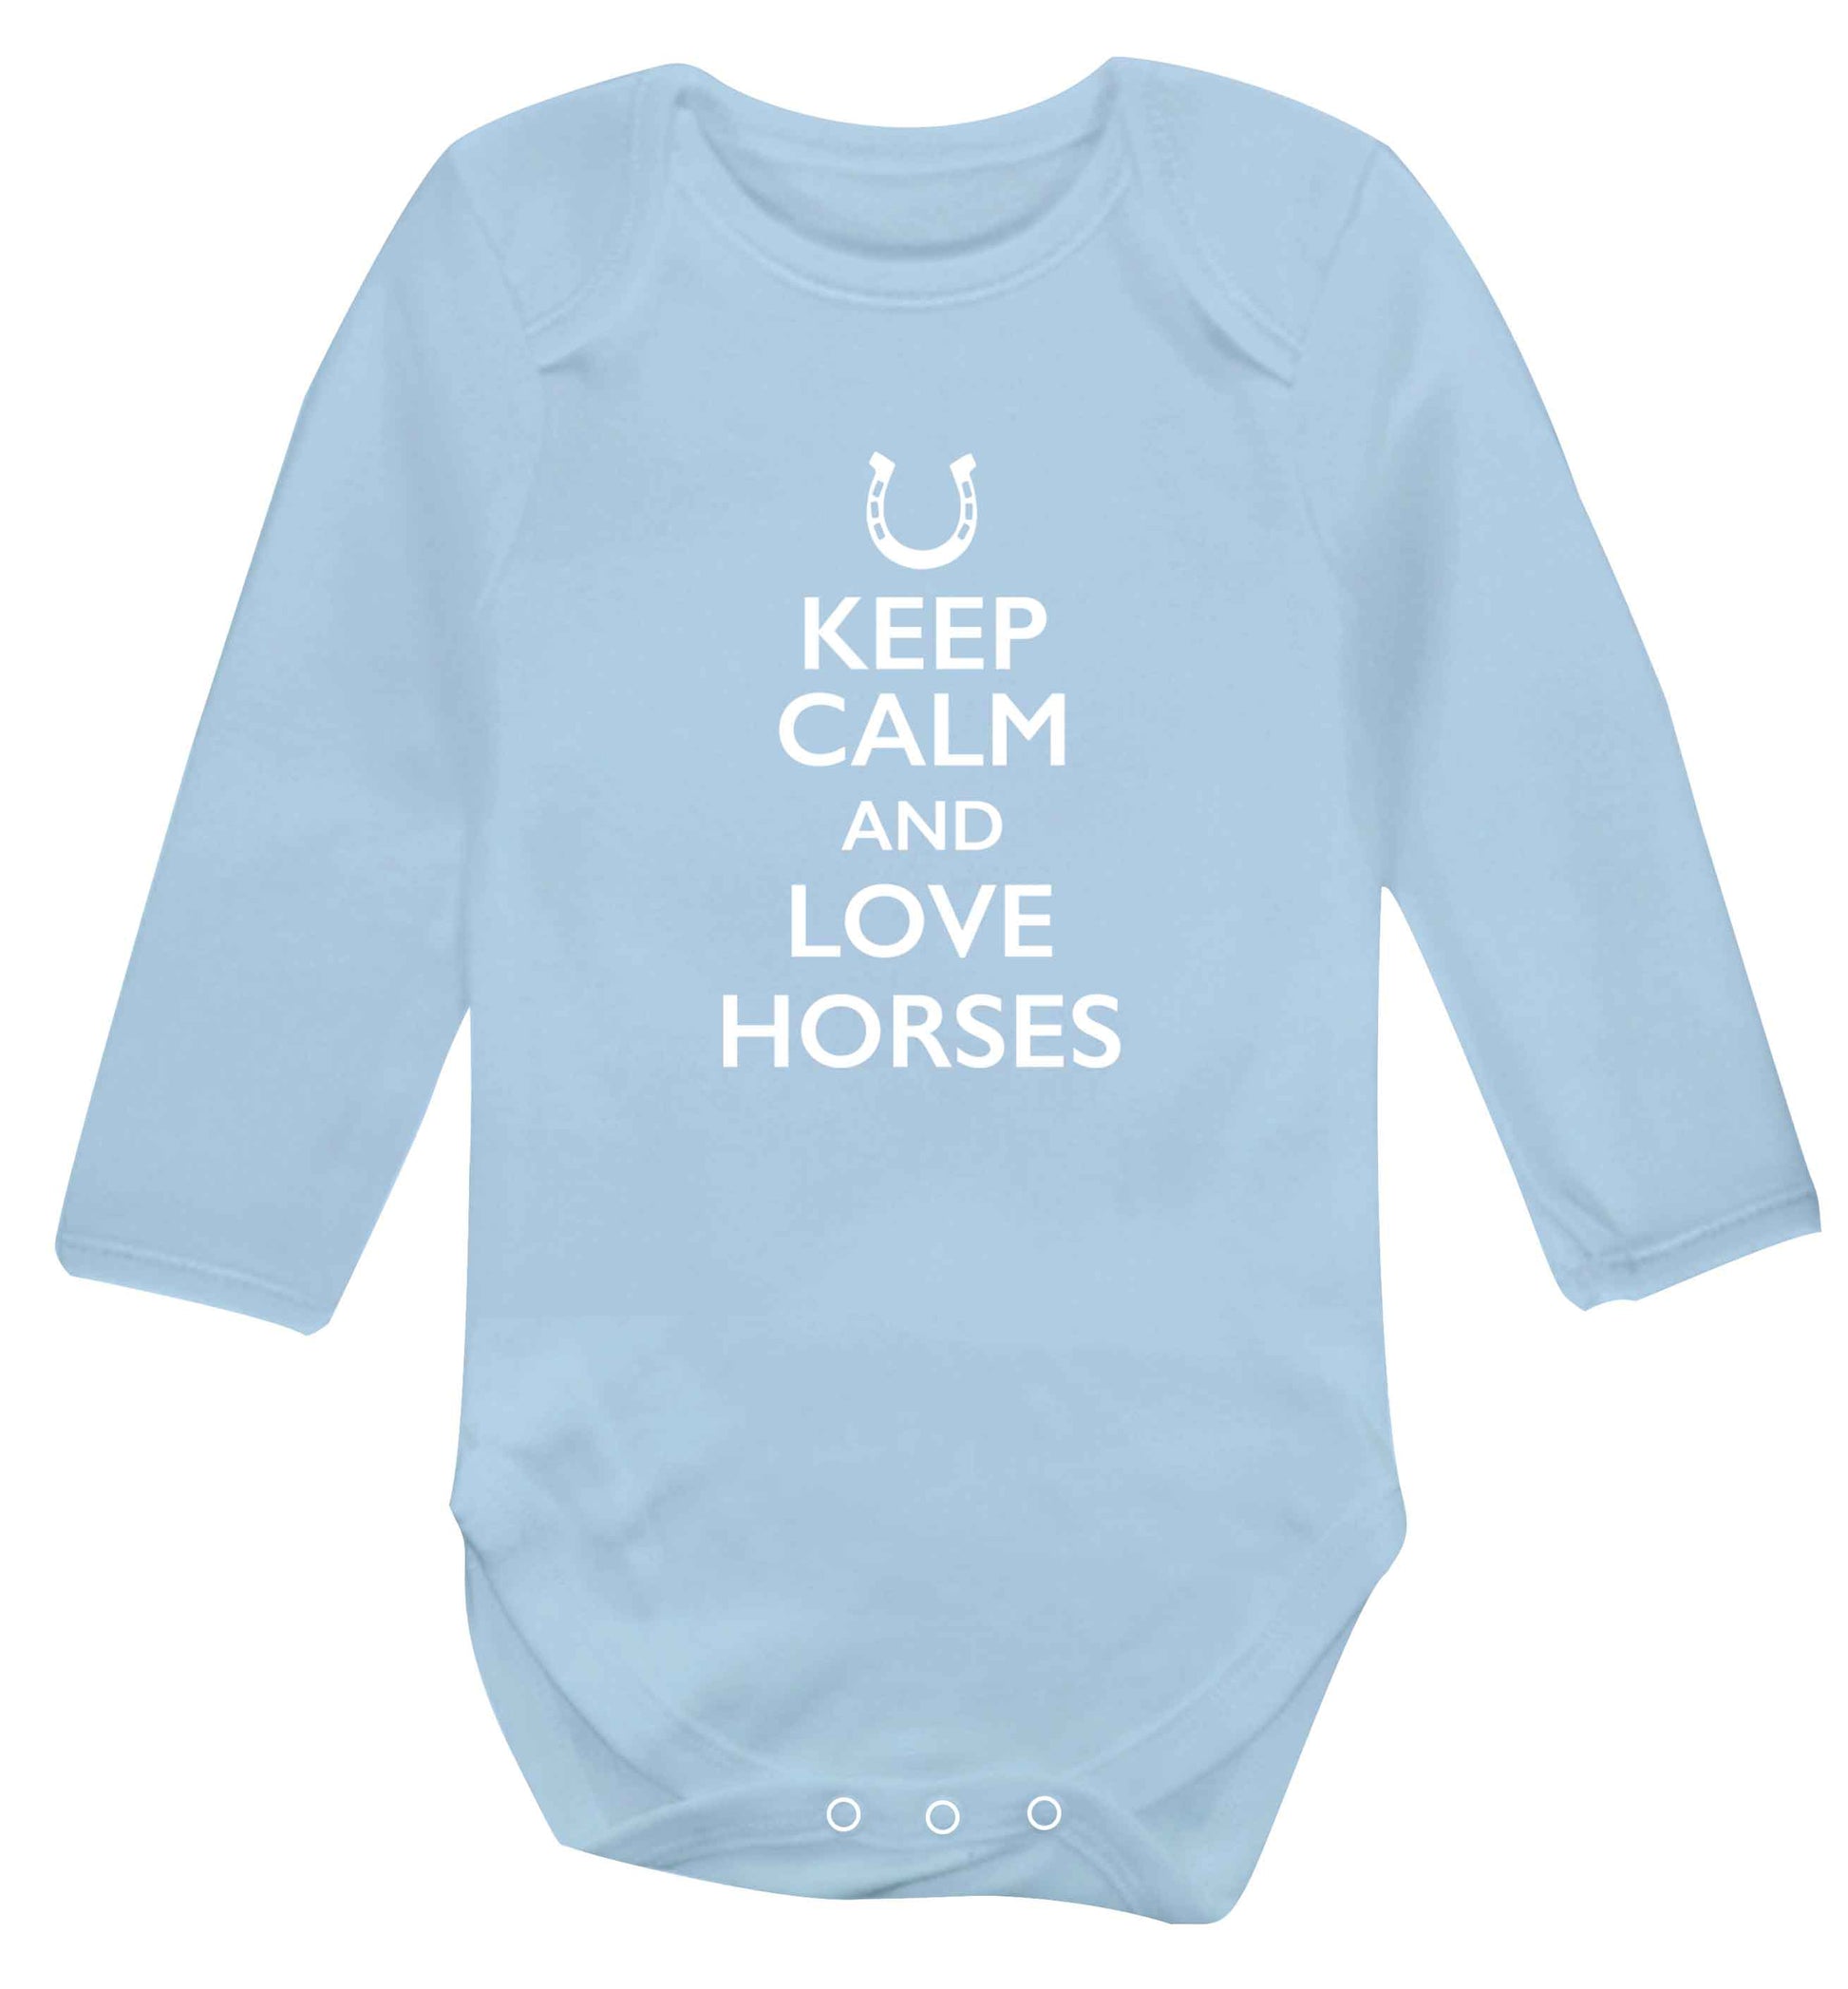 Keep calm and love horses baby vest long sleeved pale blue 6-12 months